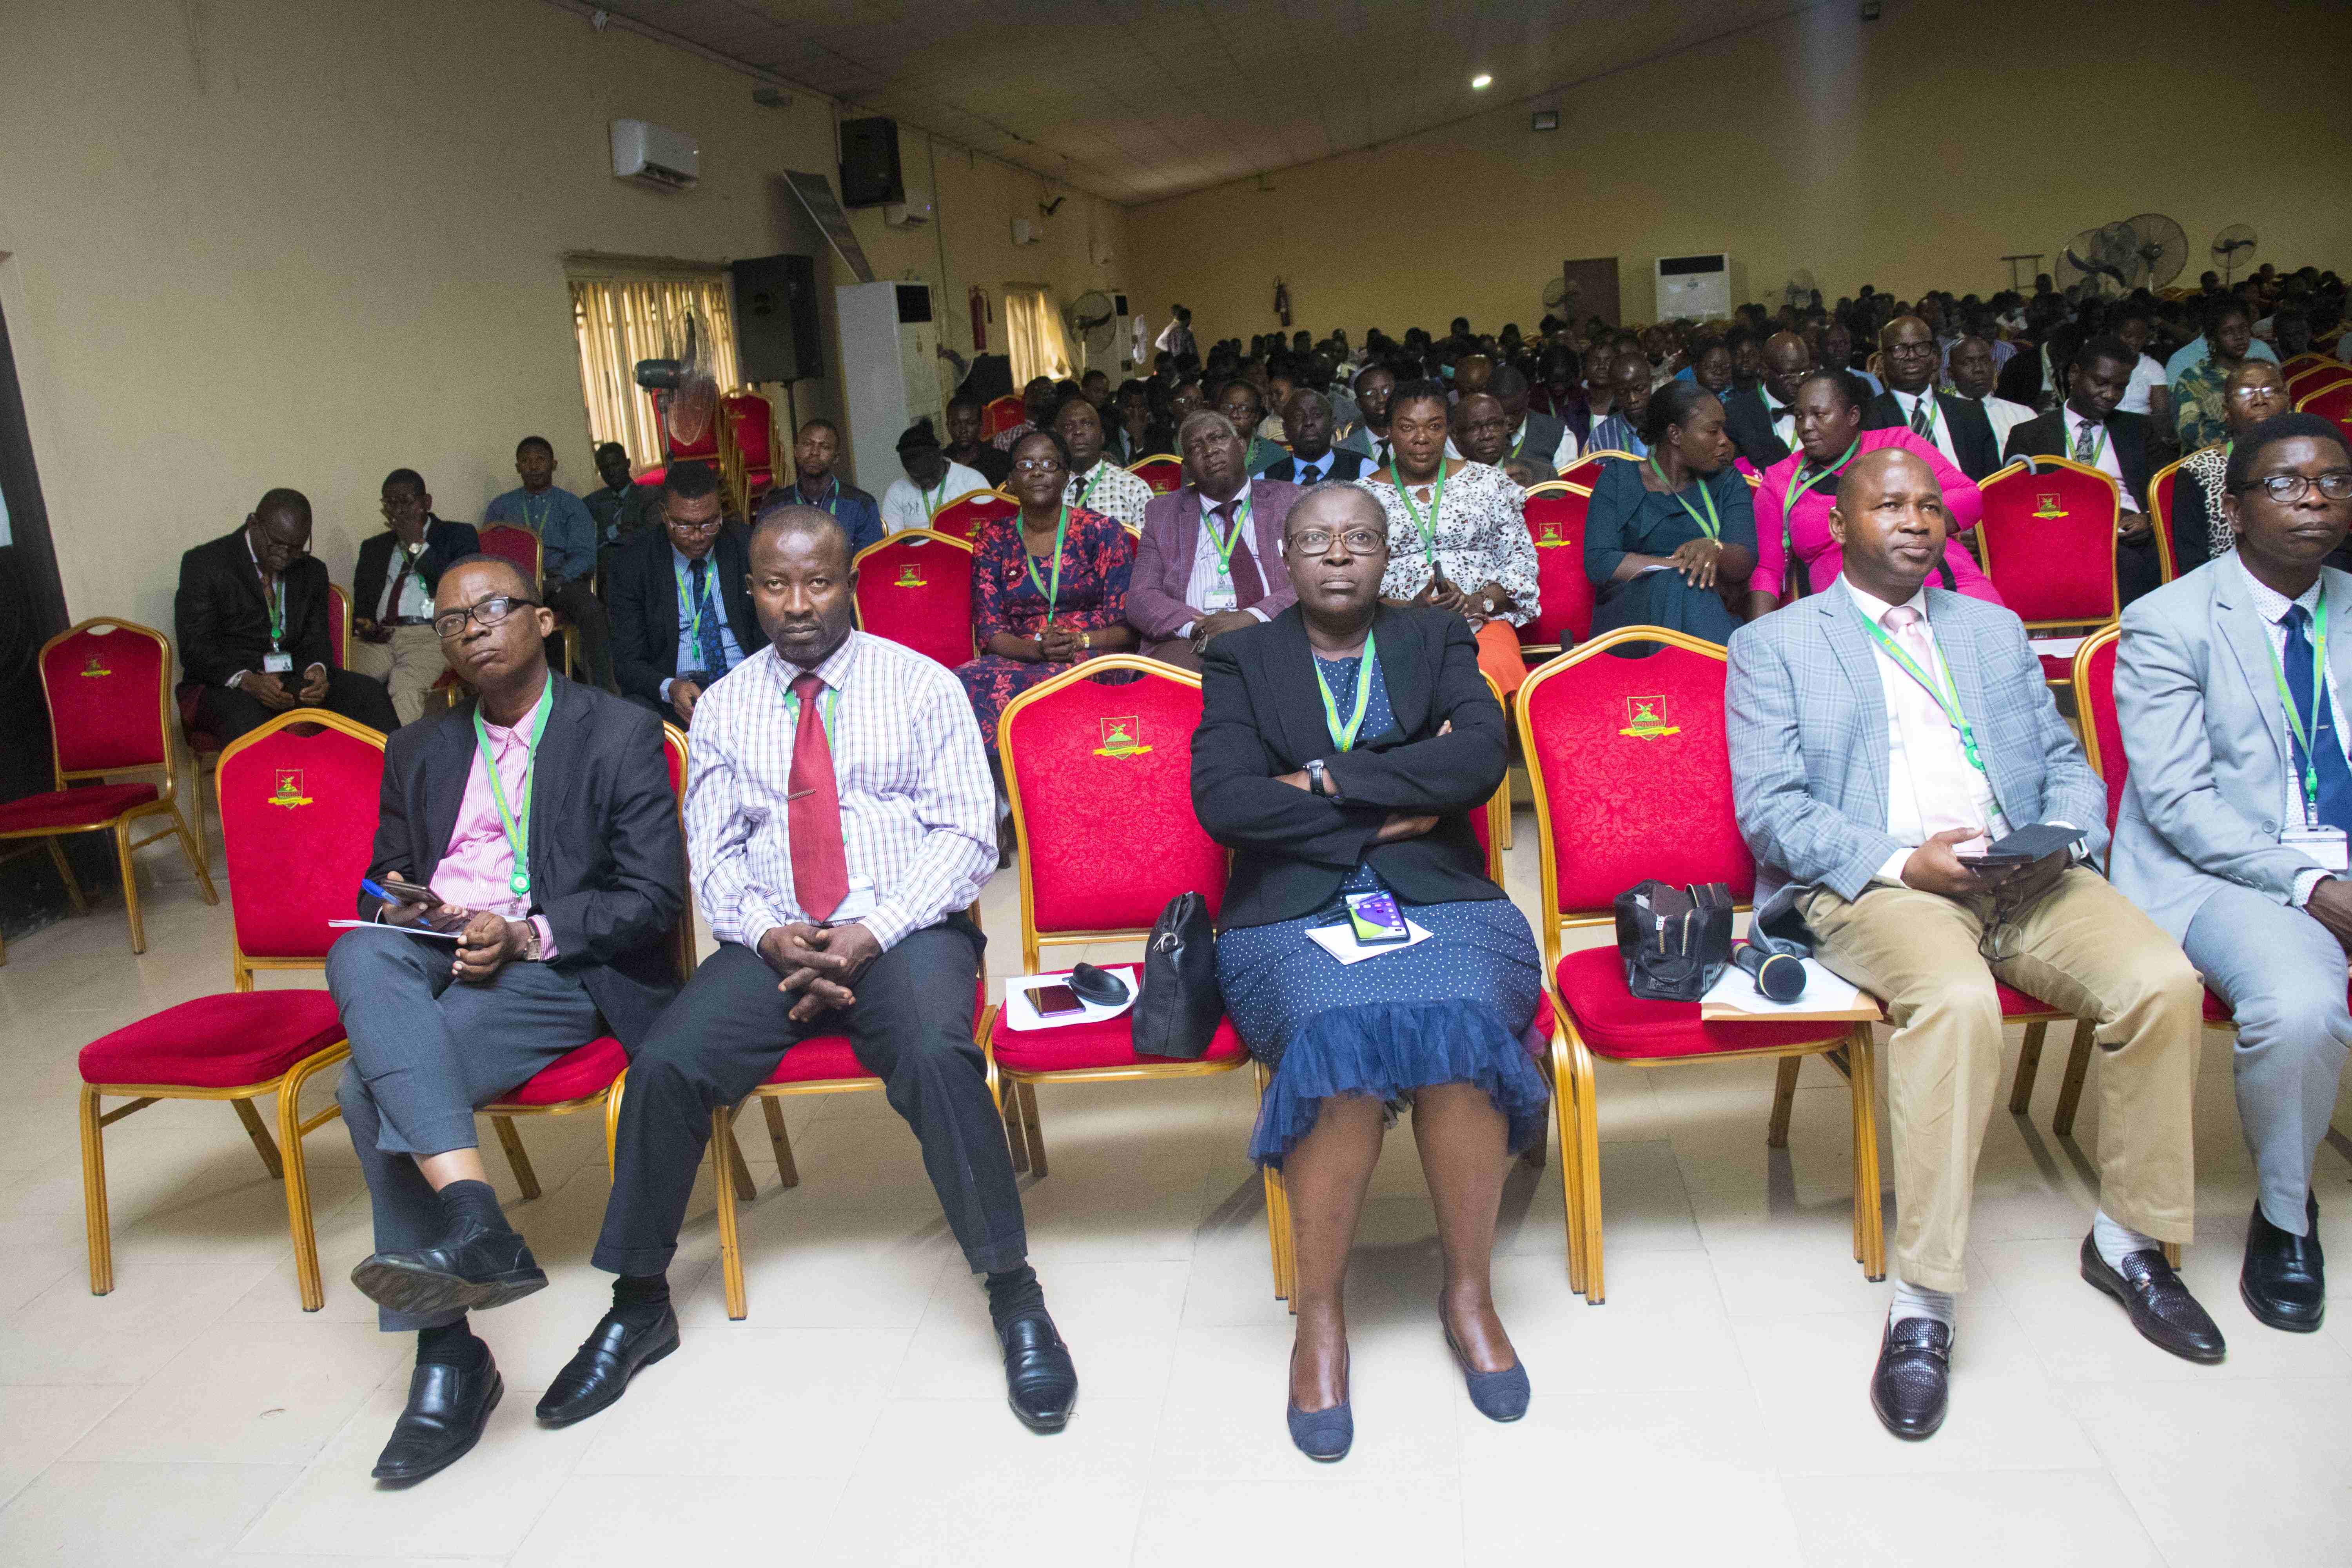 MTU HOLDS SPECIAL LECTURE: TED Conference Speaker Calls for an Exchange of Ideas and Mindset.